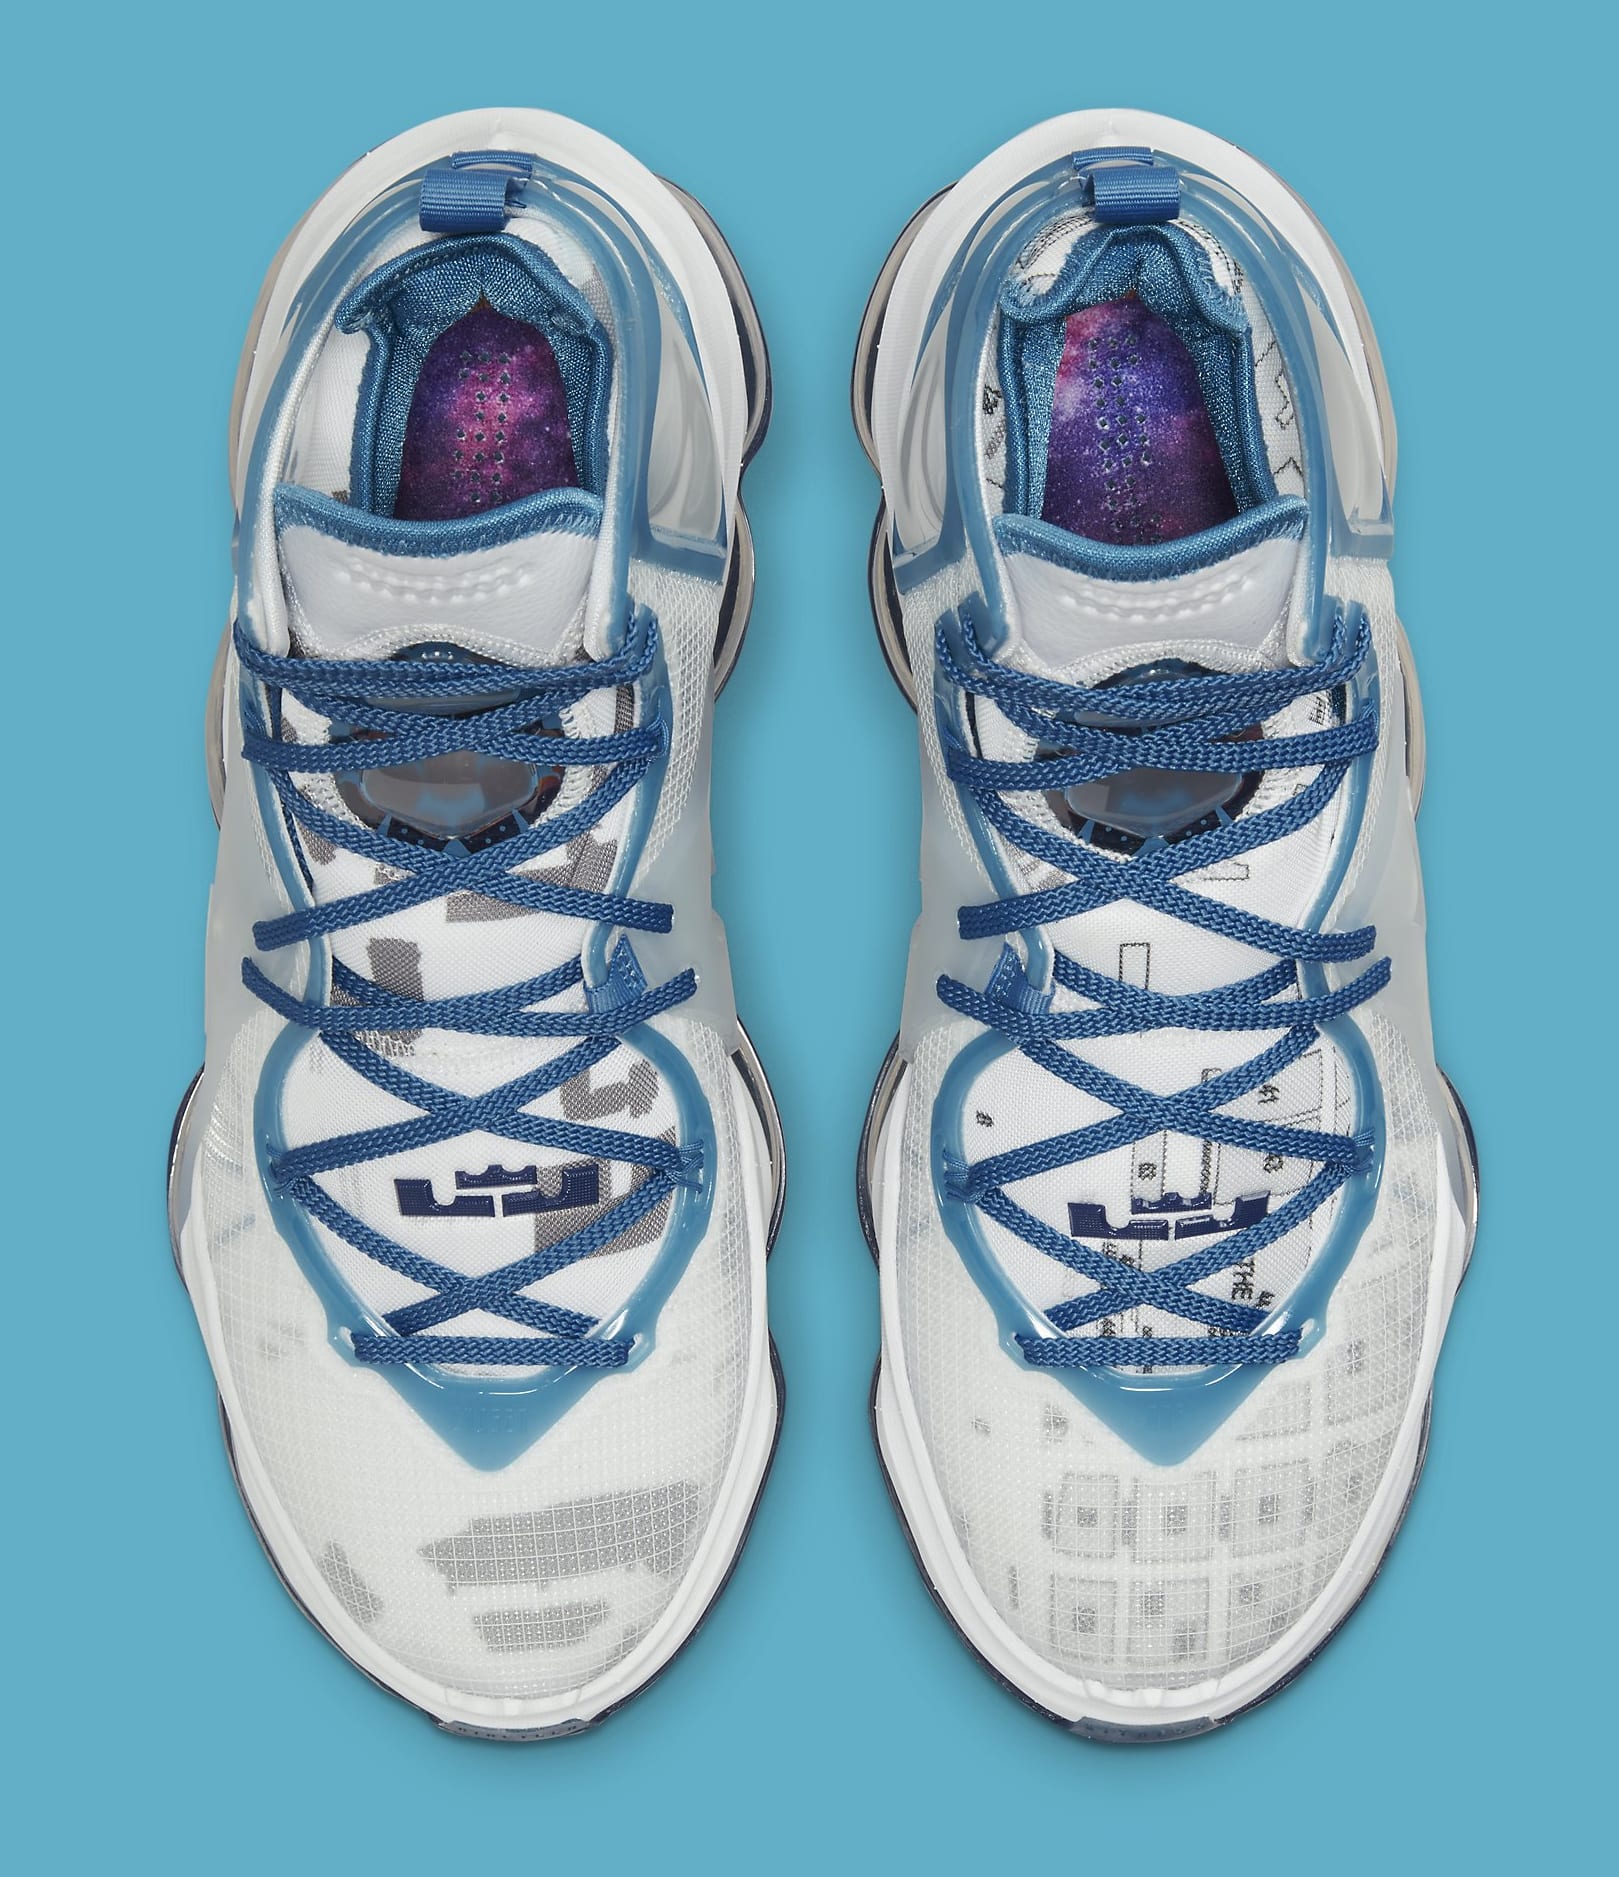 Lebron 19 space jam edition, Men's Fashion, Footwear, Sneakers on